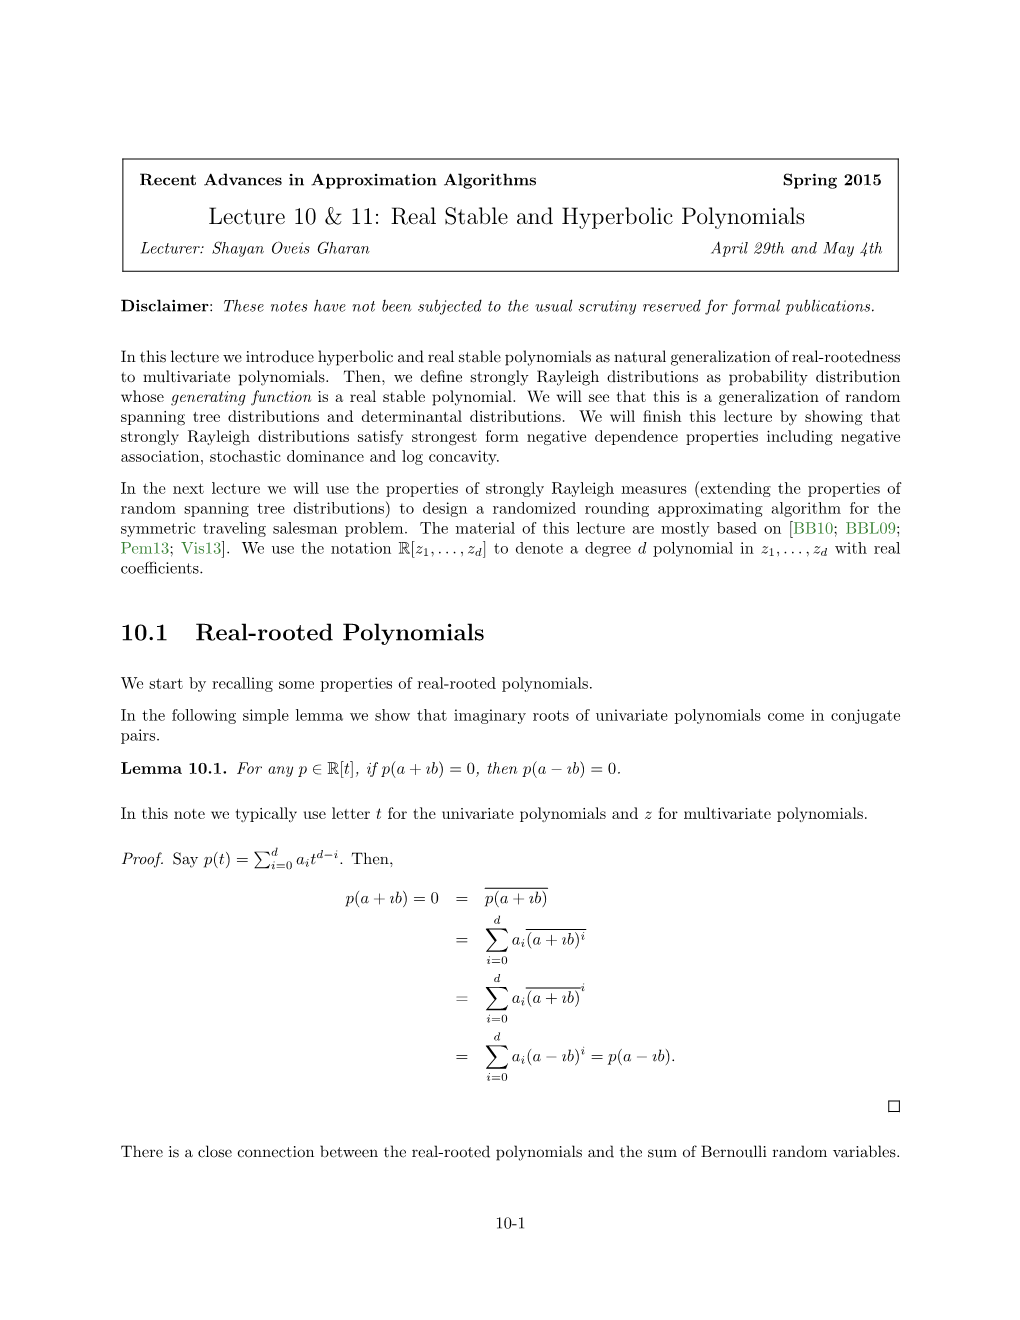 Real Stable and Hyperbolic Polynomials 10.1 Real-Rooted